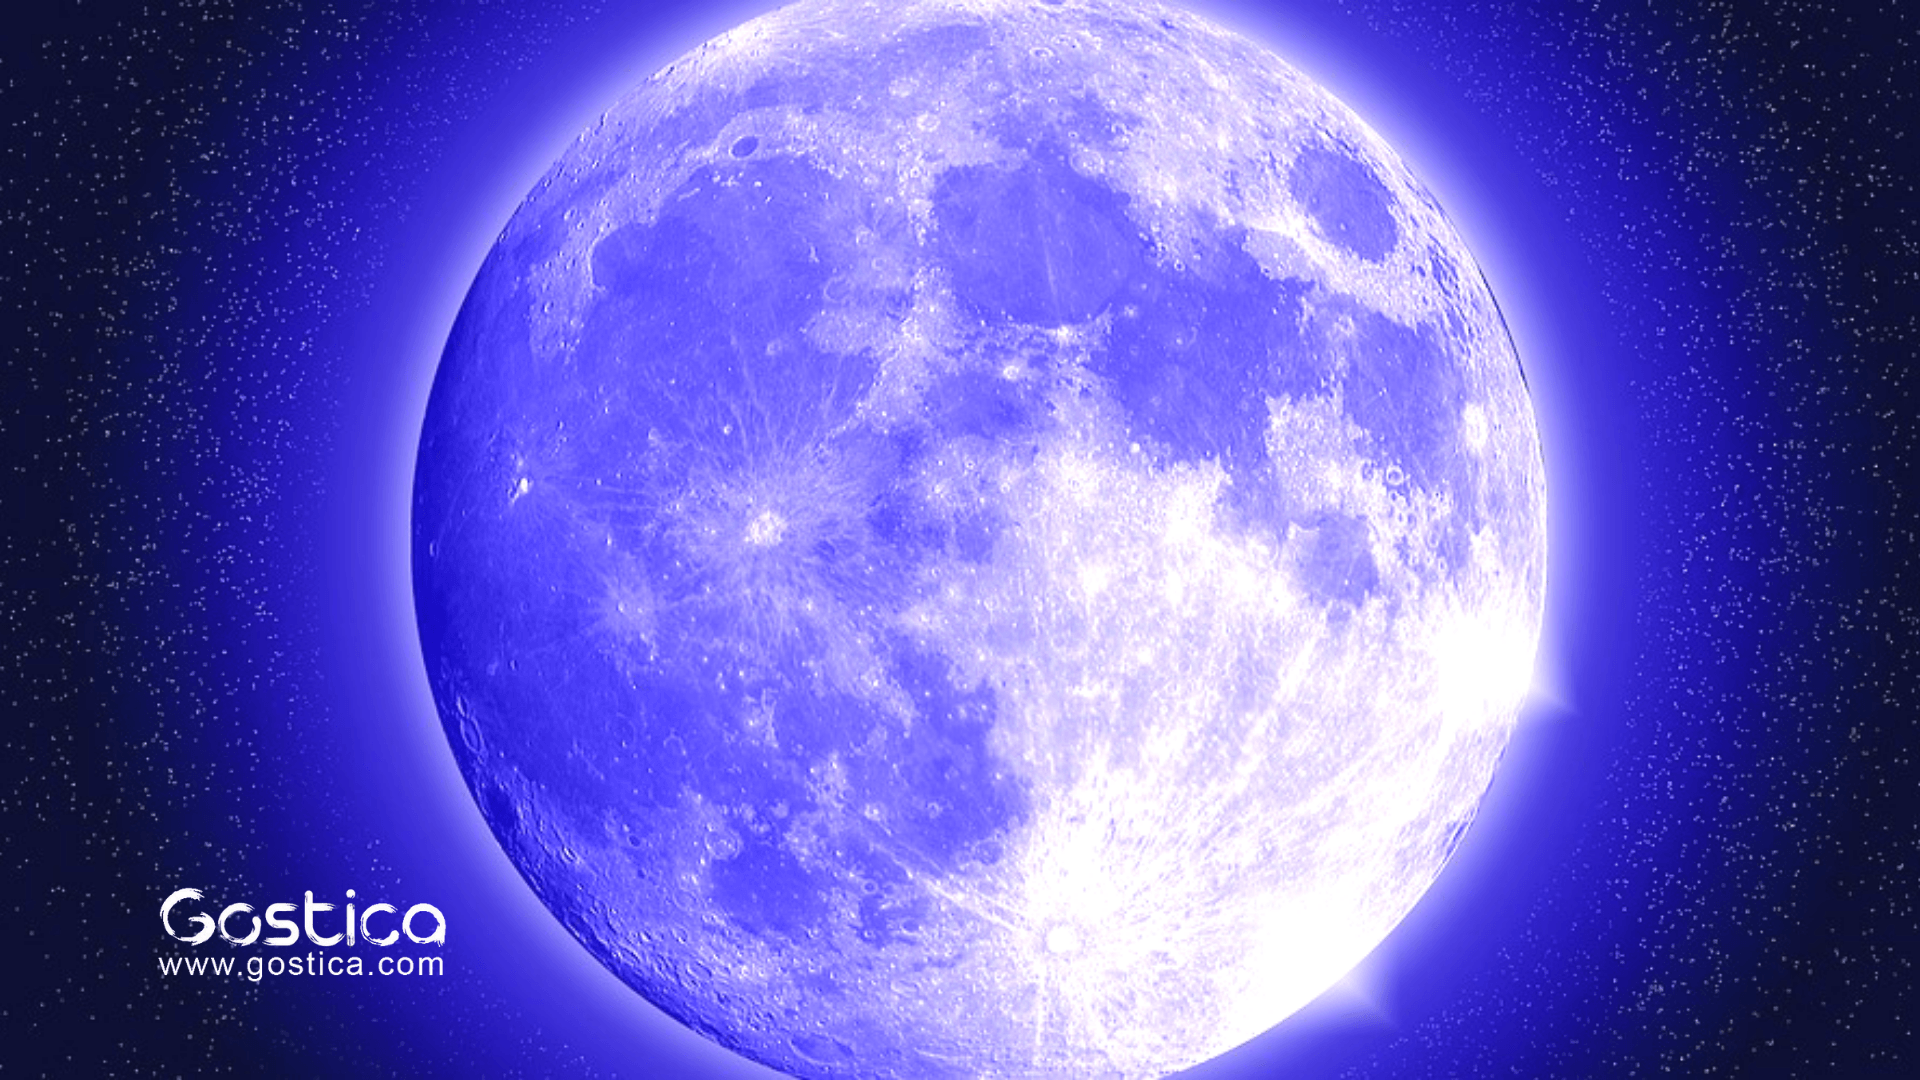 The 2019 Blue Moon: Embracing The Depth Of Your Power